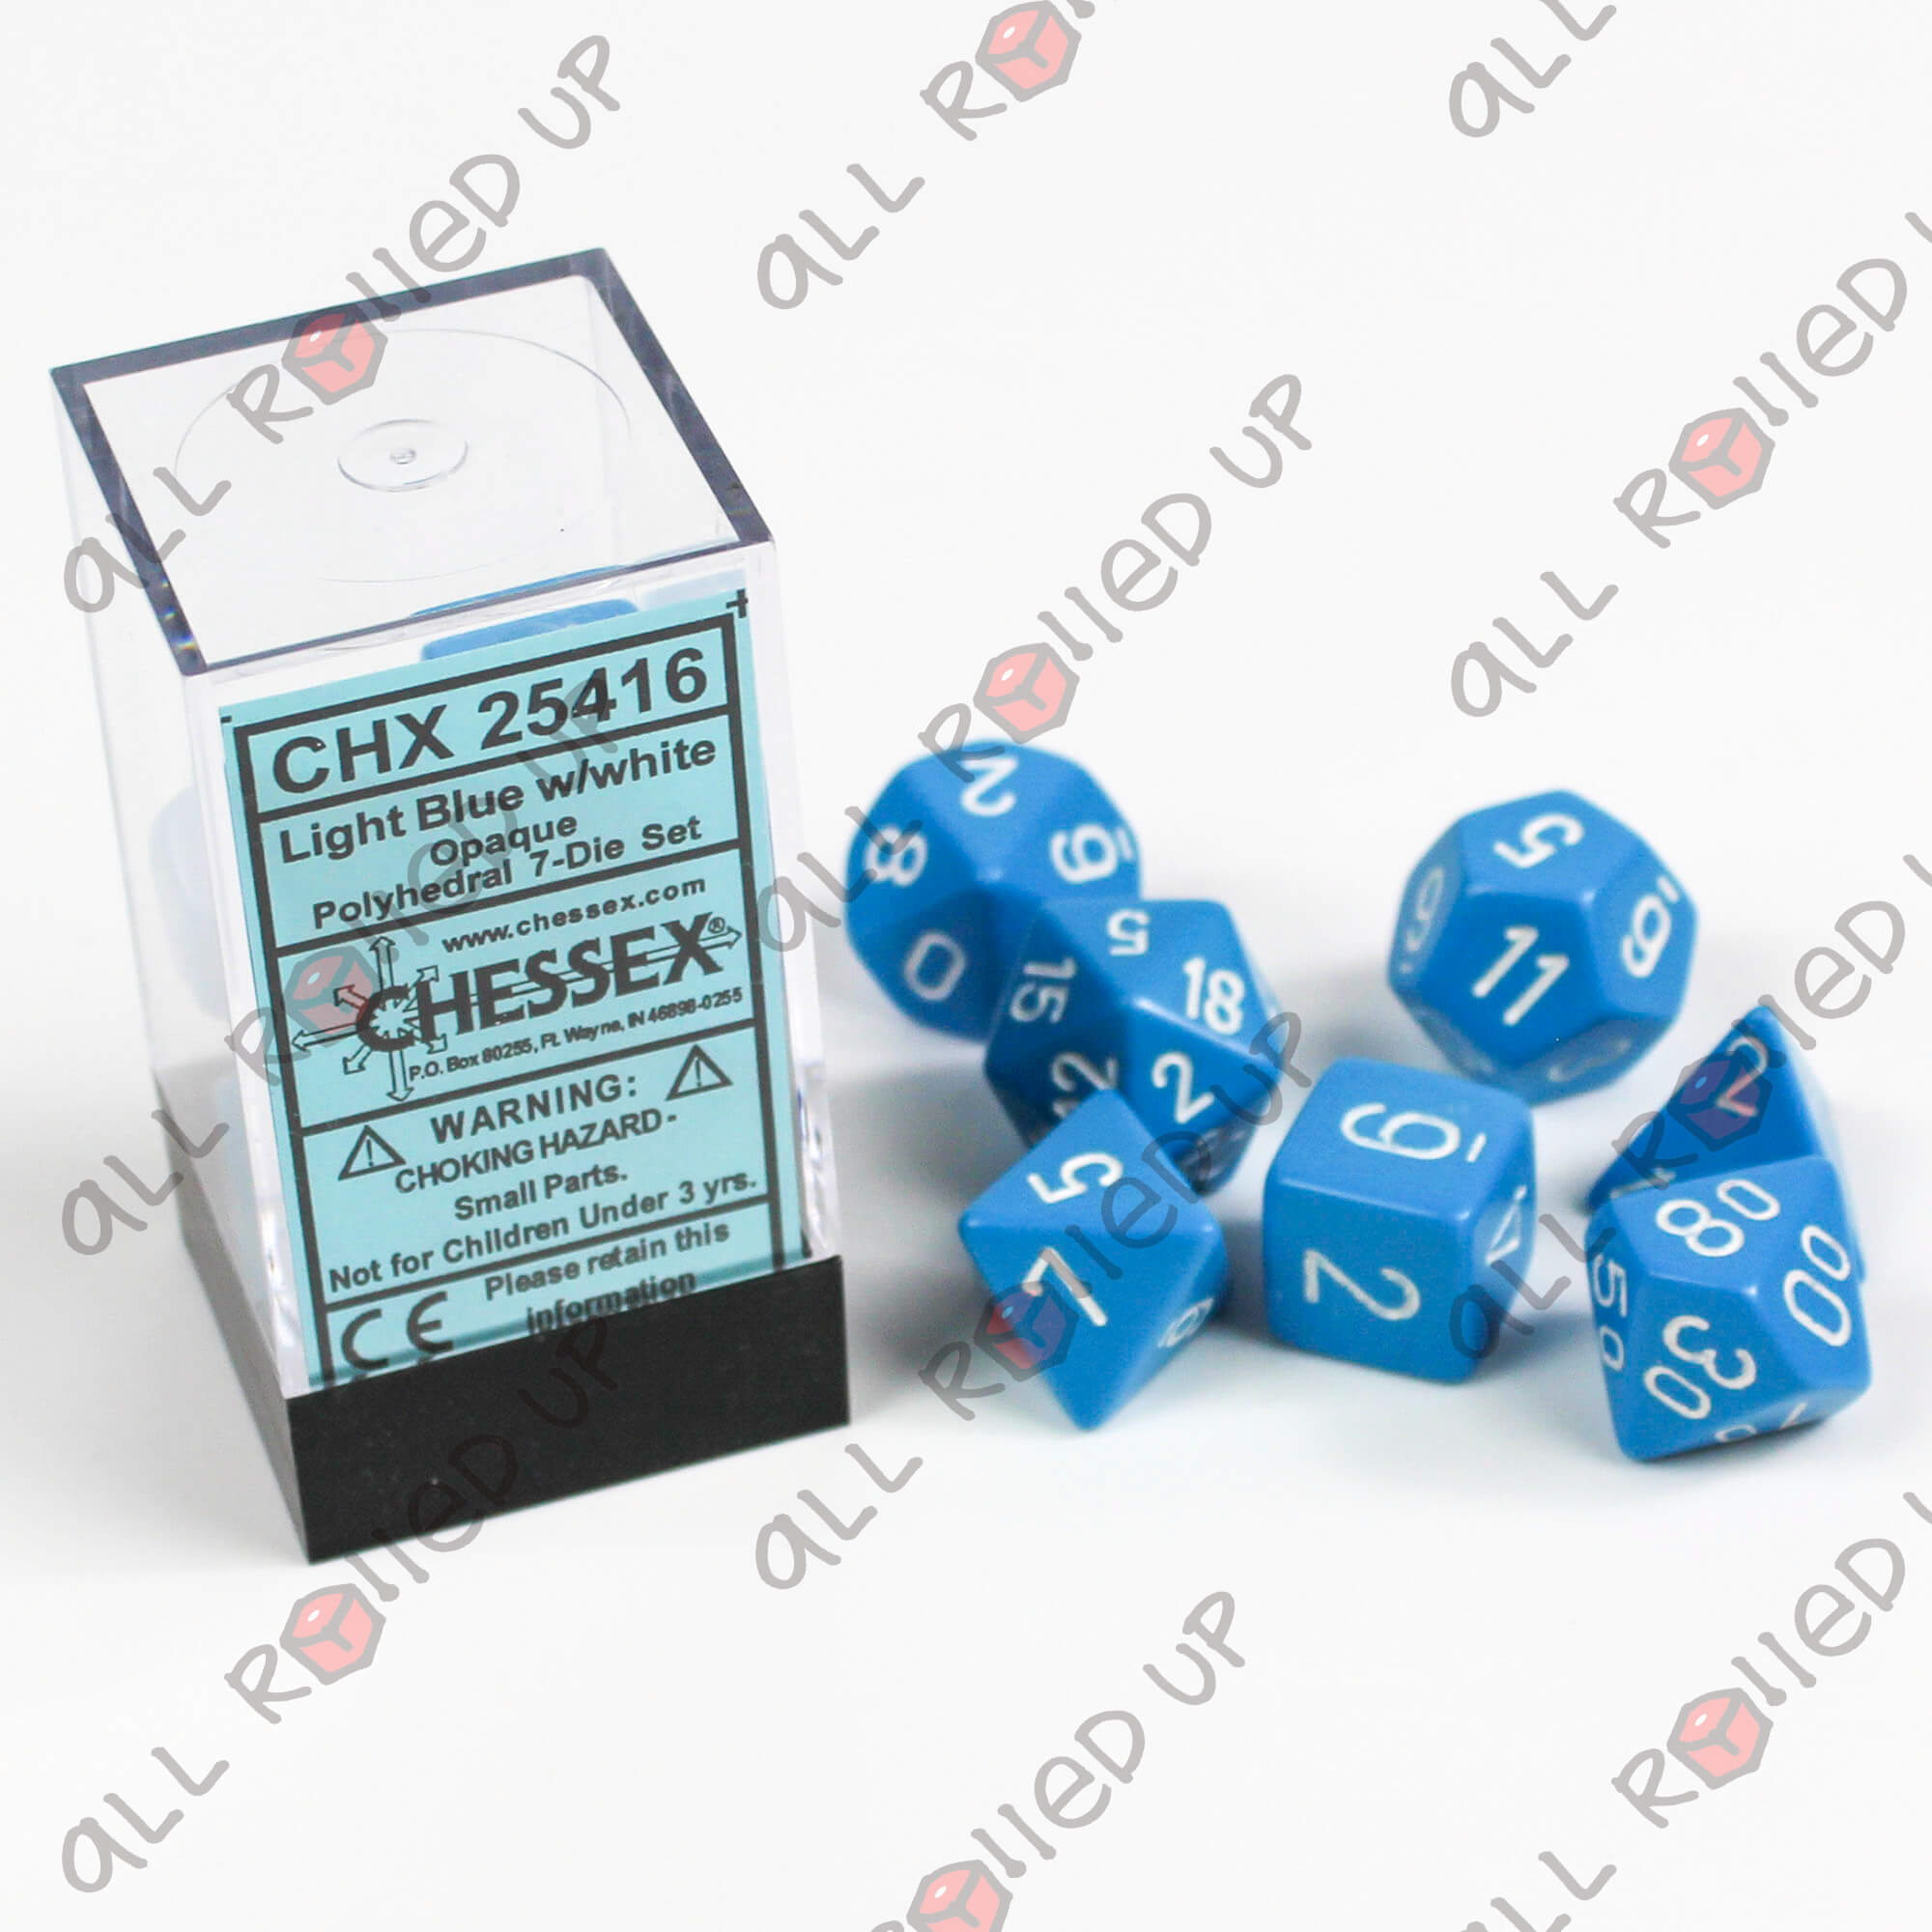 Light Blue with White CHX 25416 Polyhedral 7-Die Opaque Dice Set 